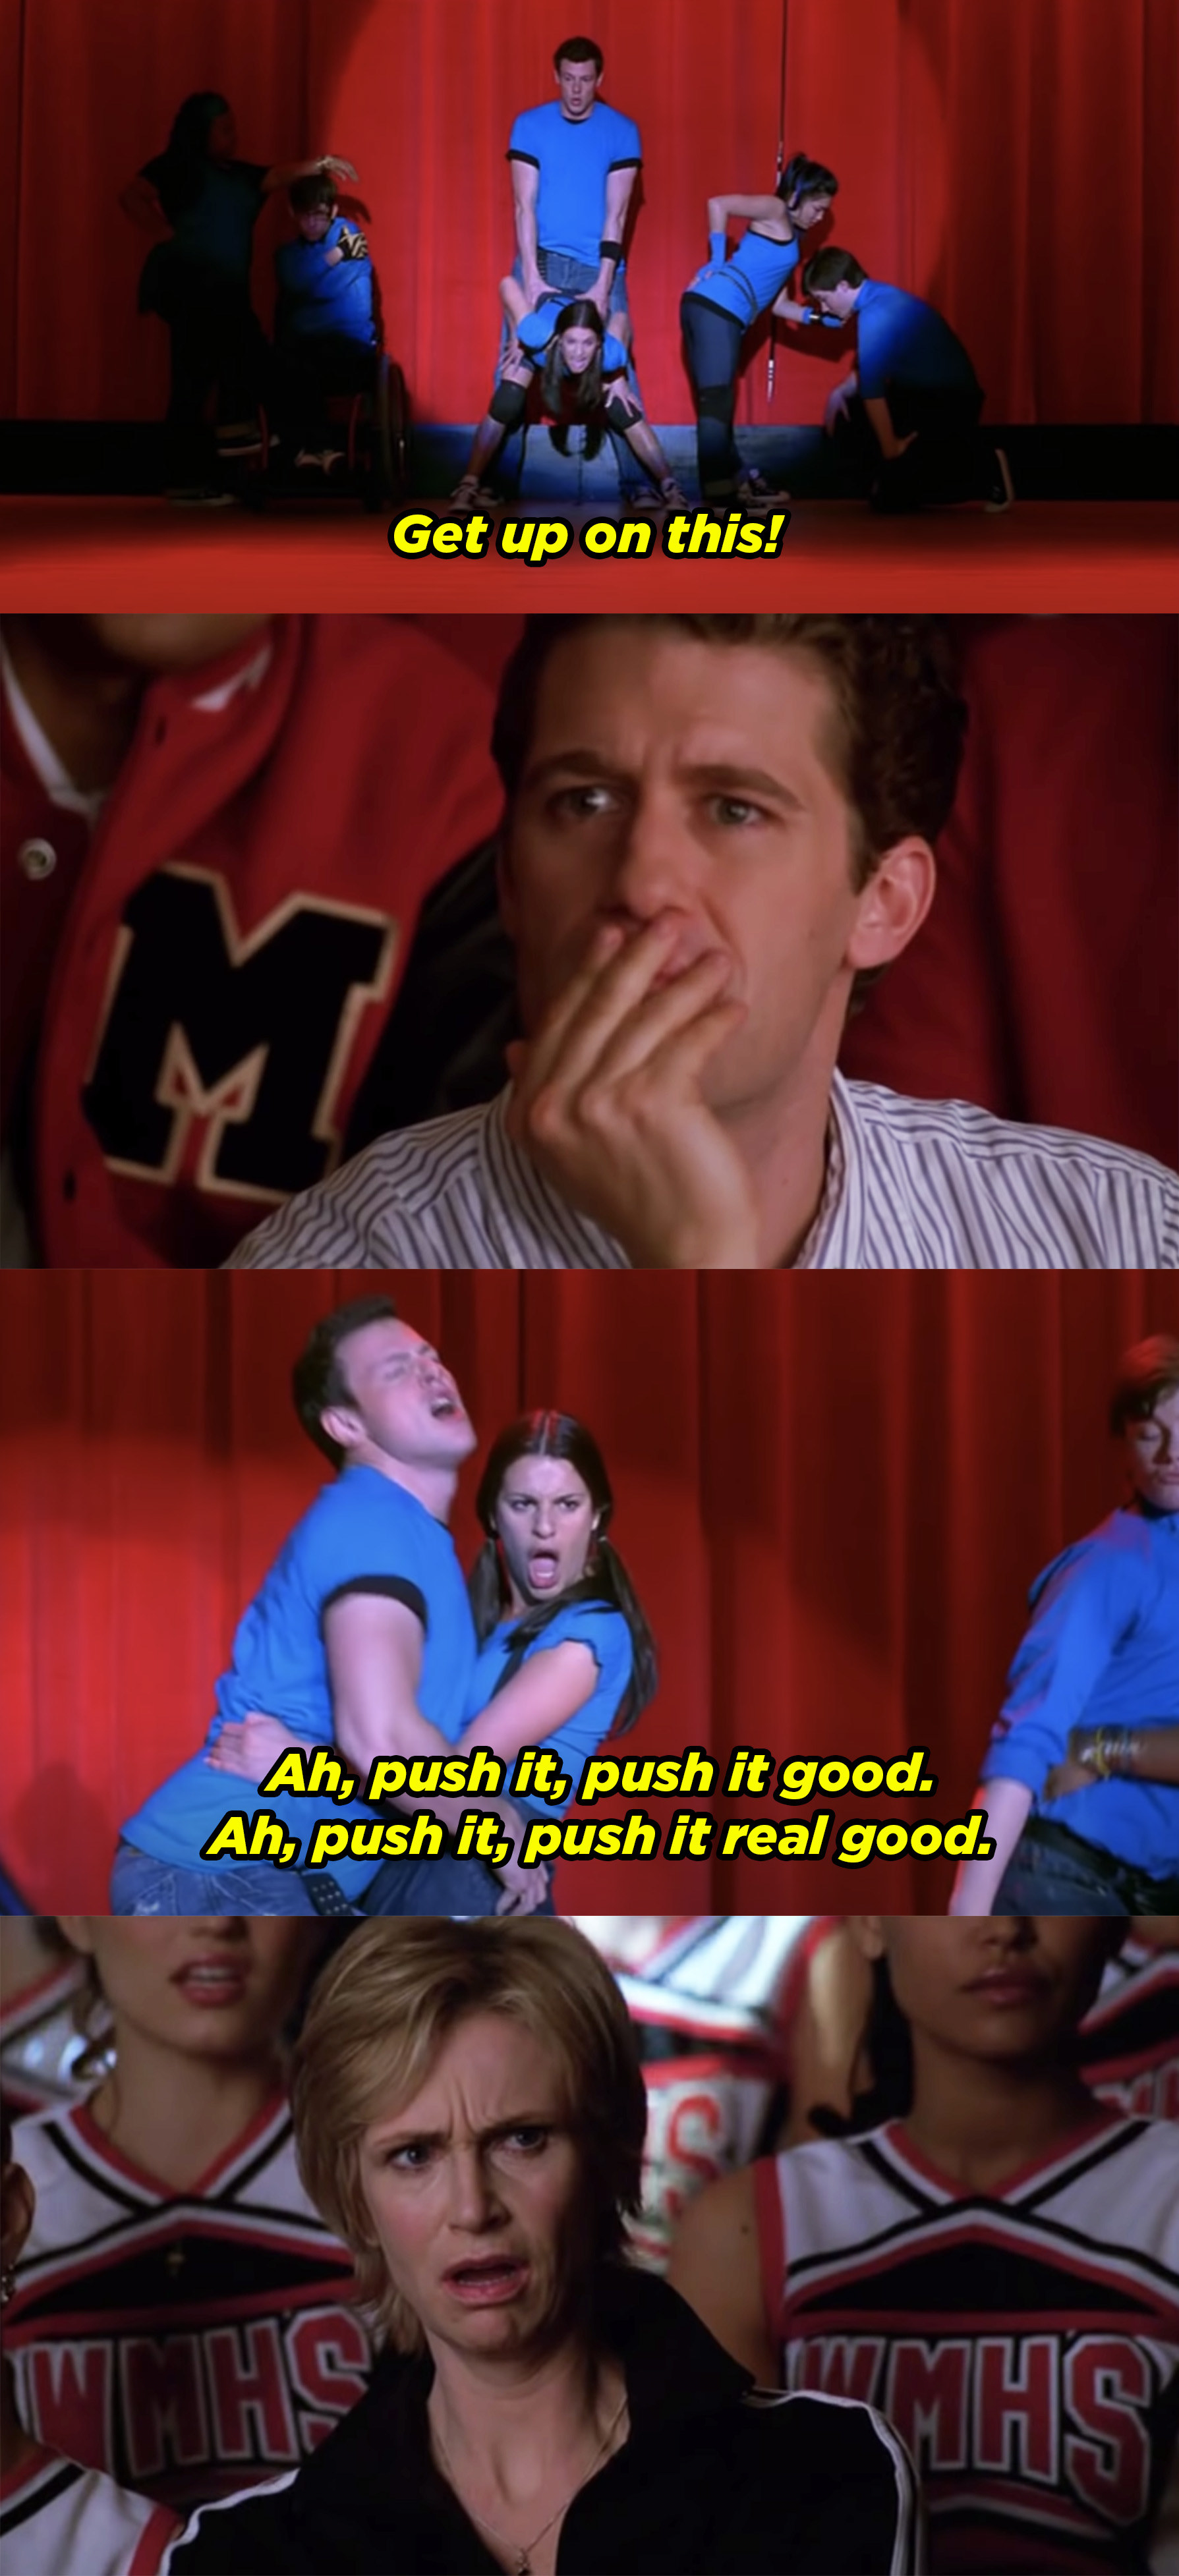 The New Directions grinding on each other while singing &quot;Push It&quot; and the audience staring at them uncomfortably. 